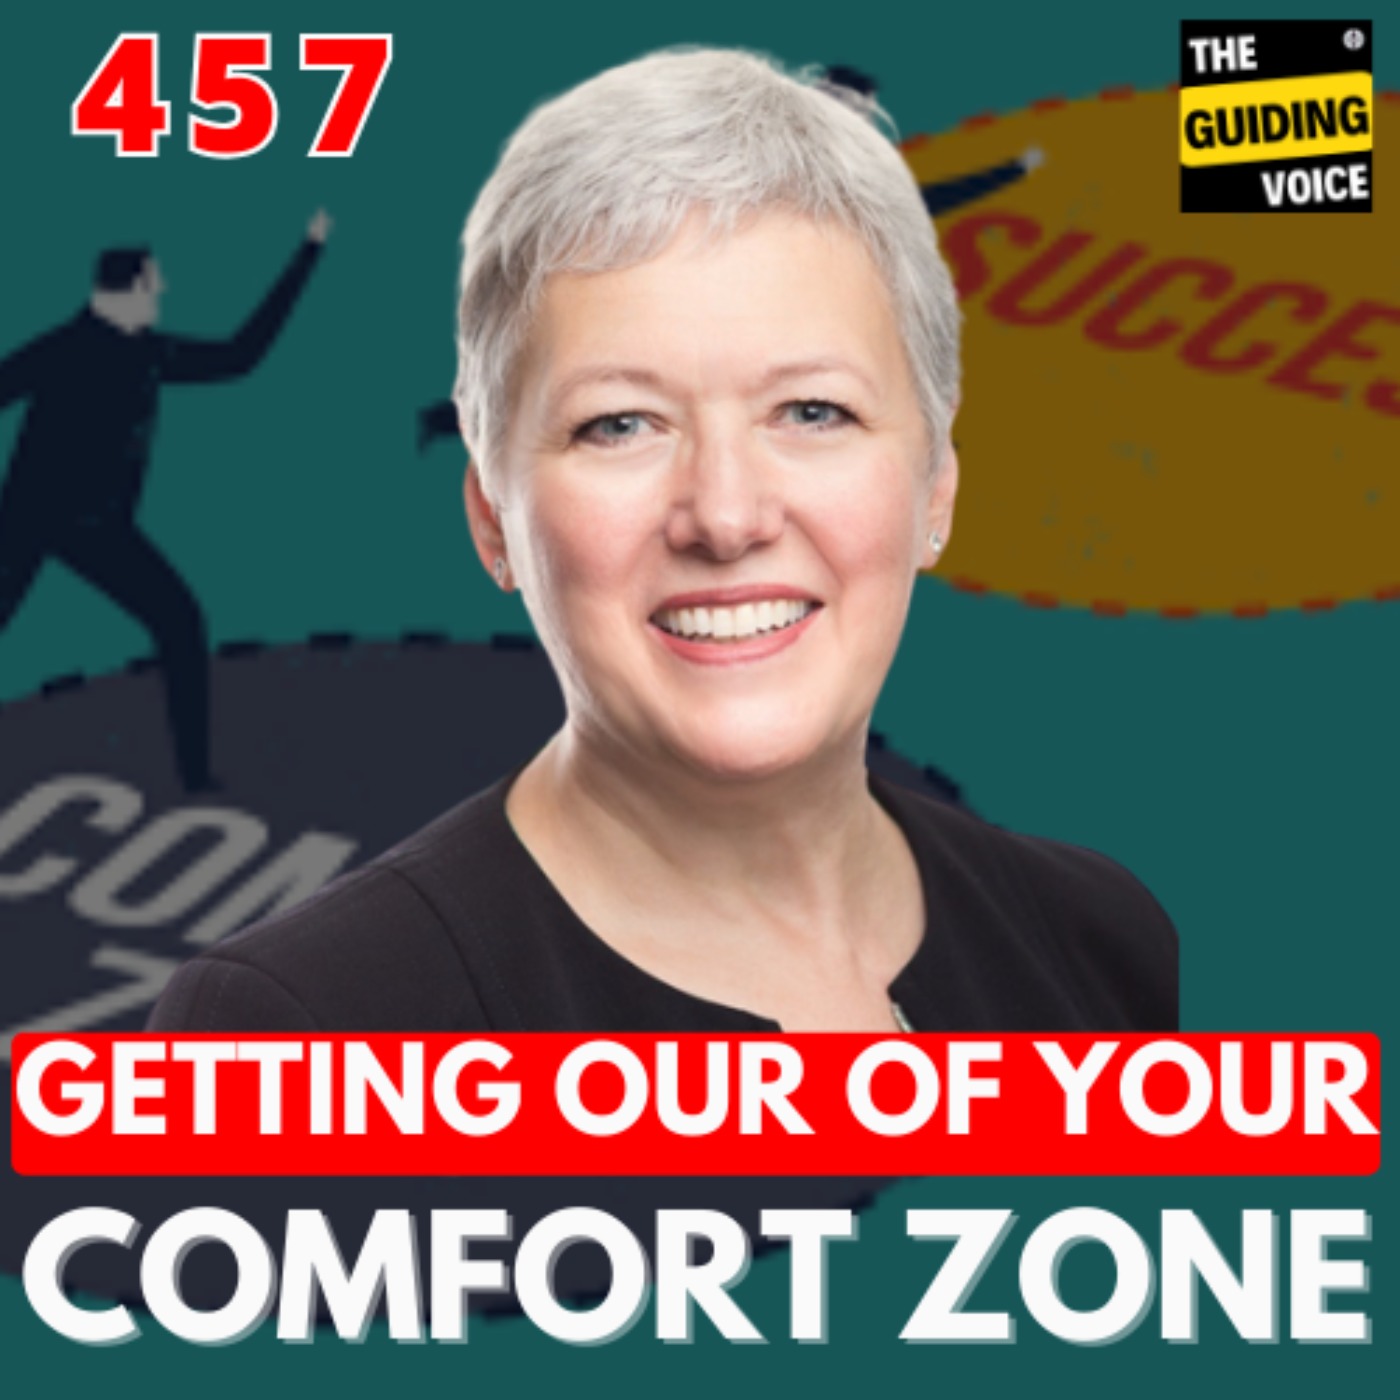 Getting out of your comfort zone | Wanda Wallace | #TGV457